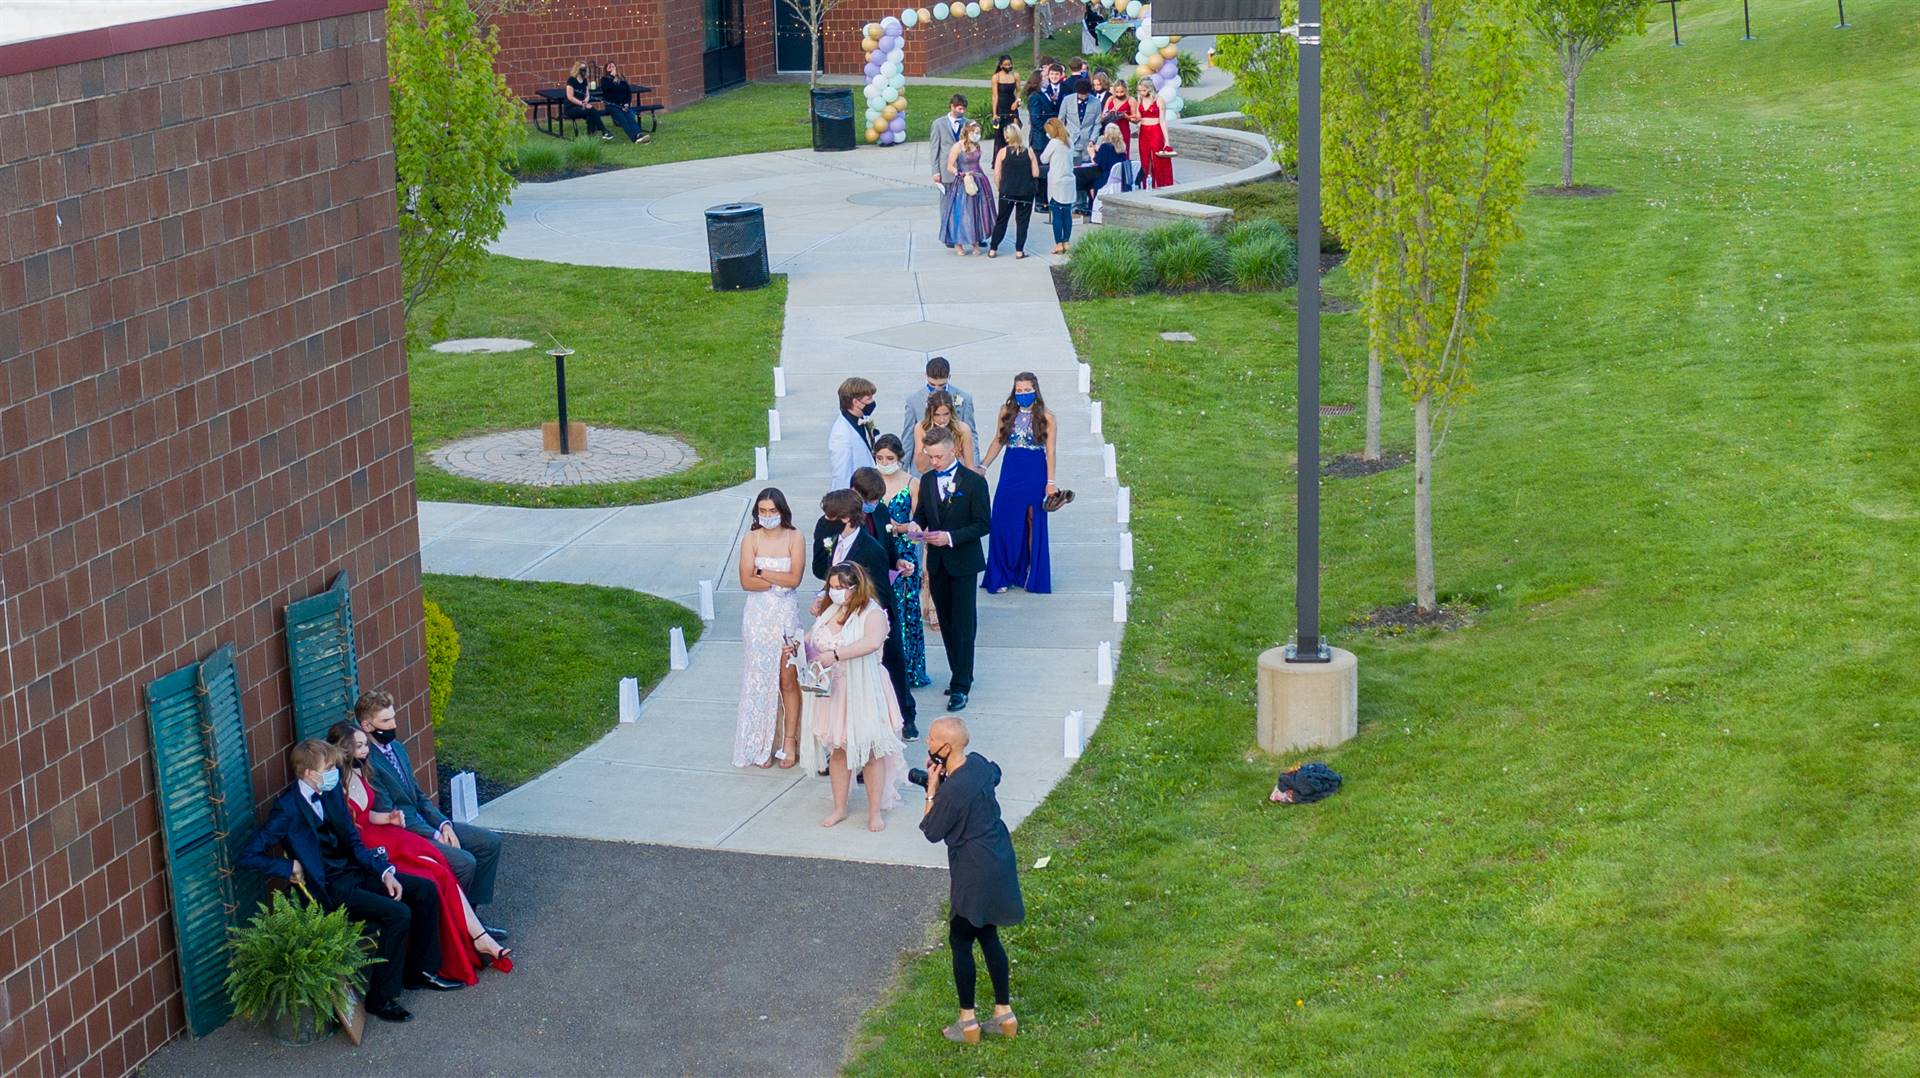 Arial view of high school with students walking